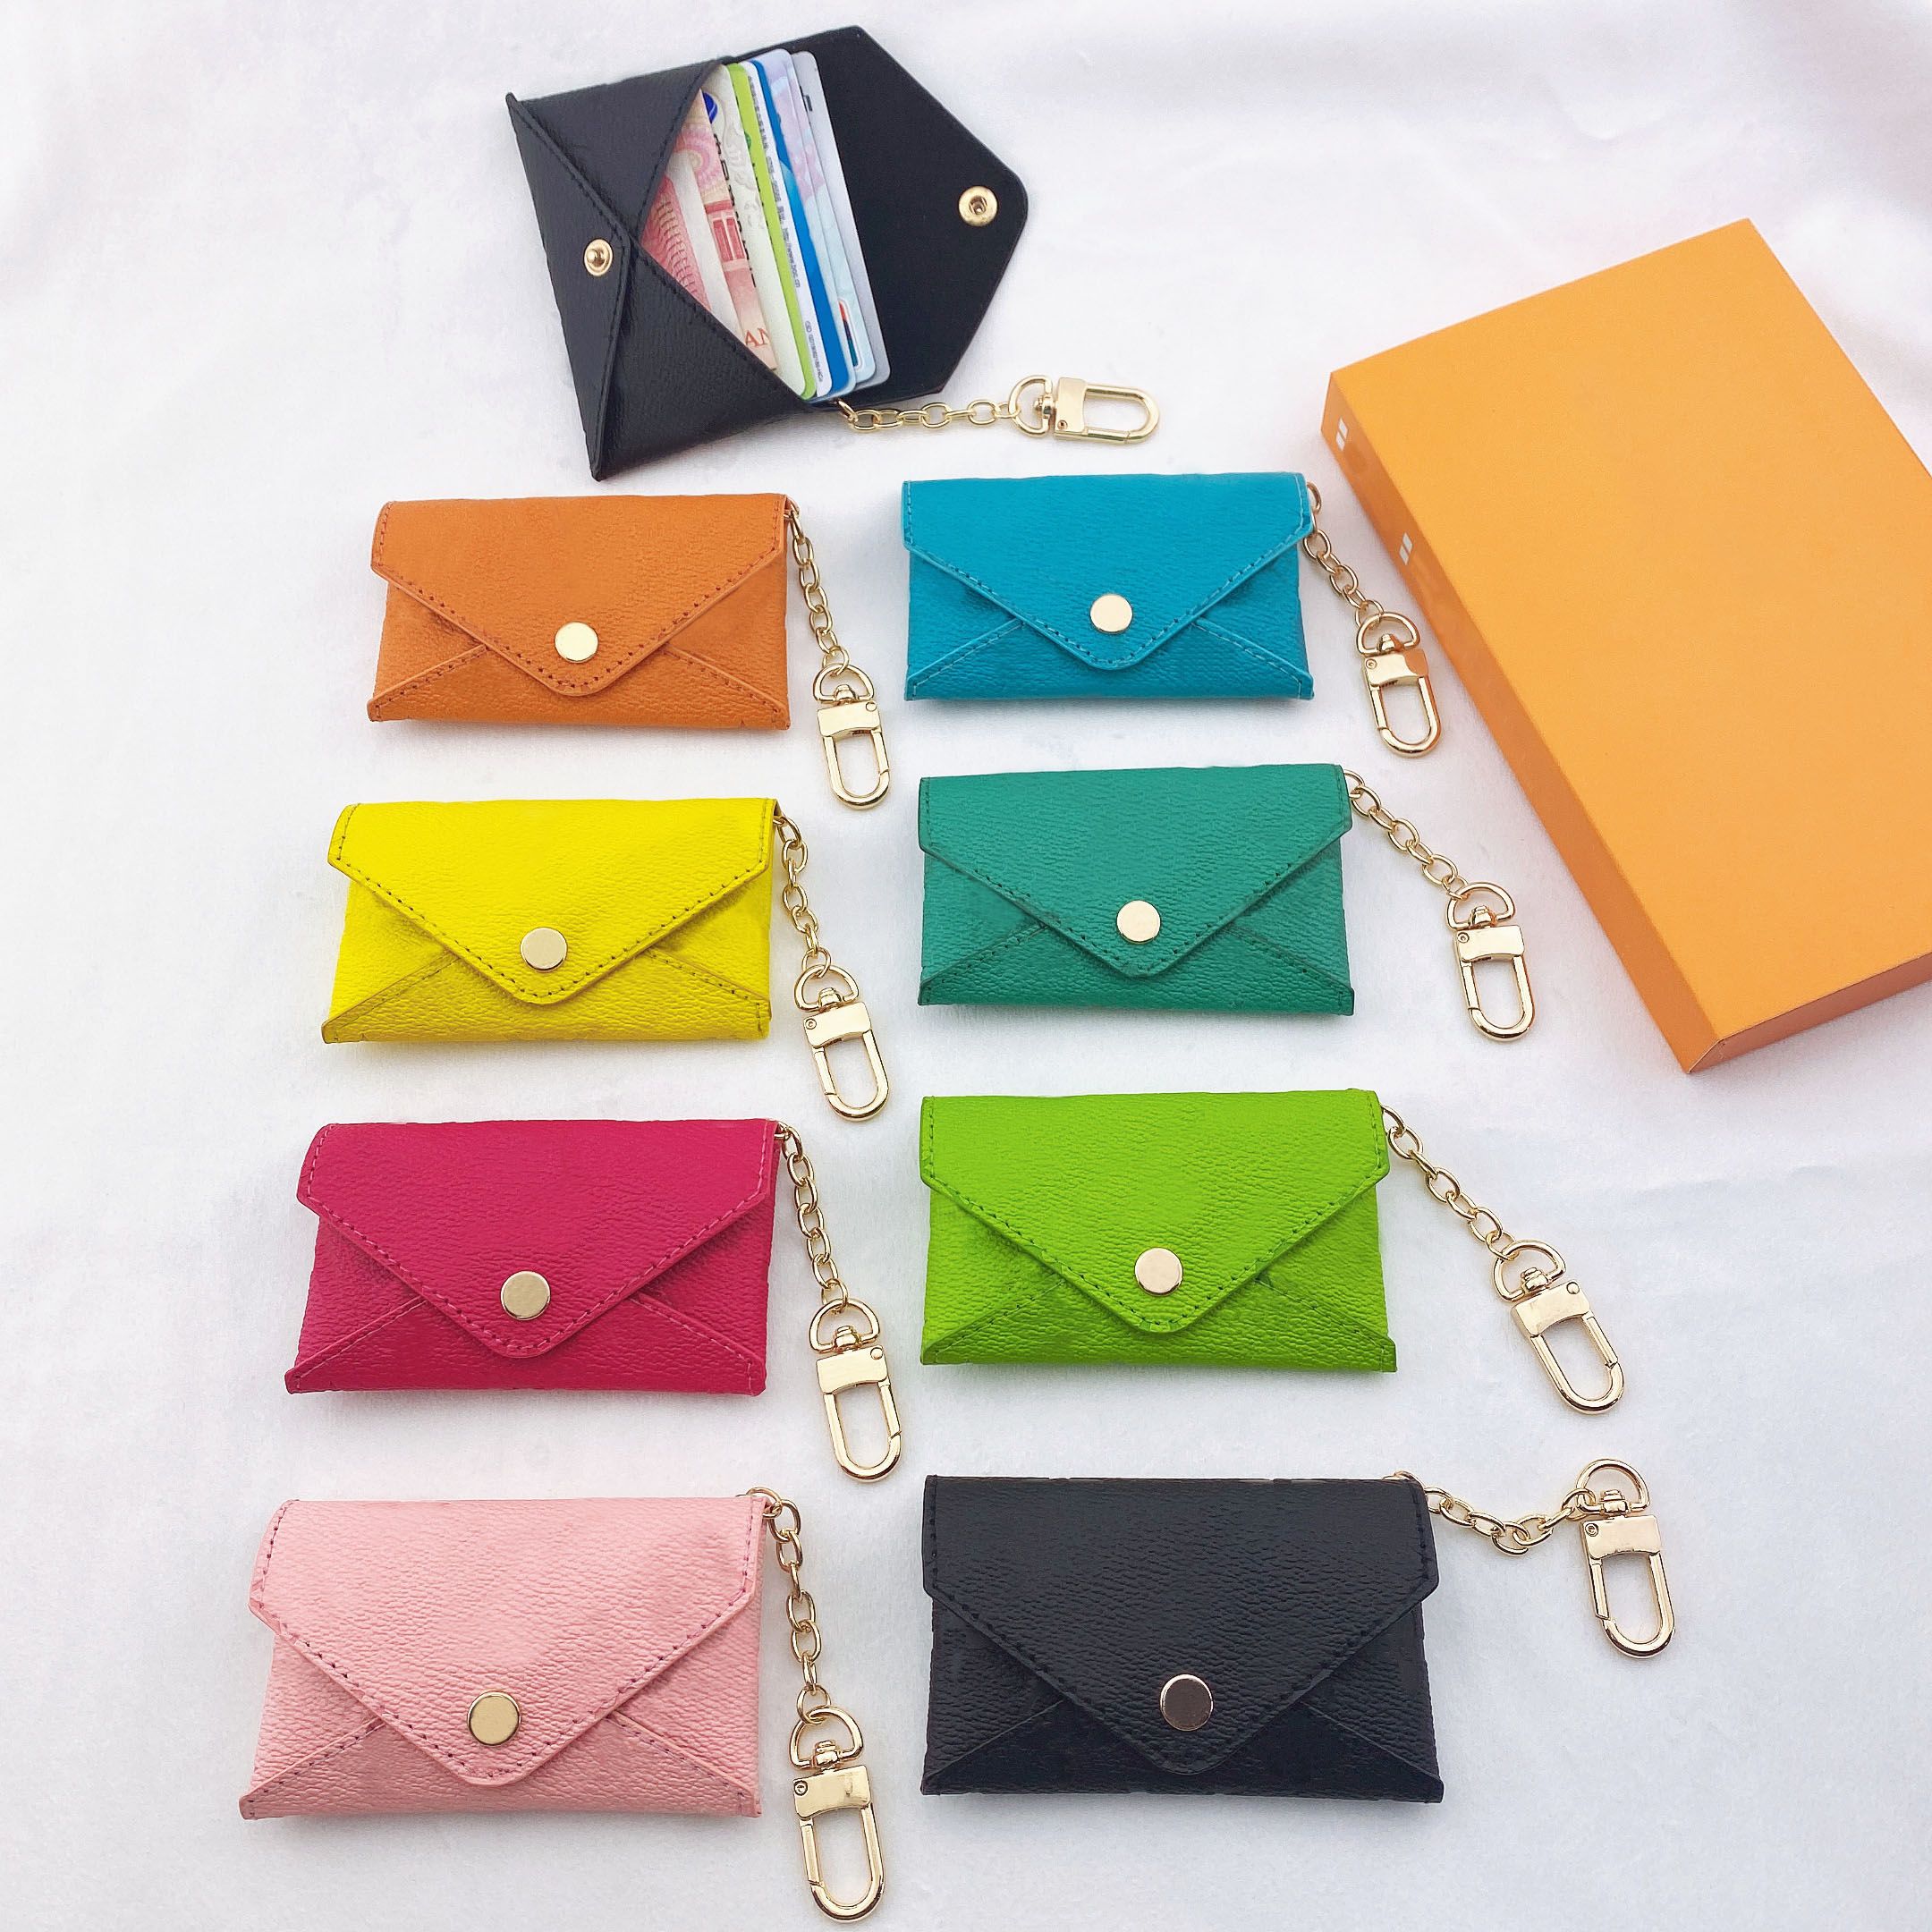 Designer Leather Cute Id Holder Keychain With Coin And Credit Card Holder  Unisex Fashion Purse With Mini Wallet Available In Epacket From  Fashionstyle07, $8.62